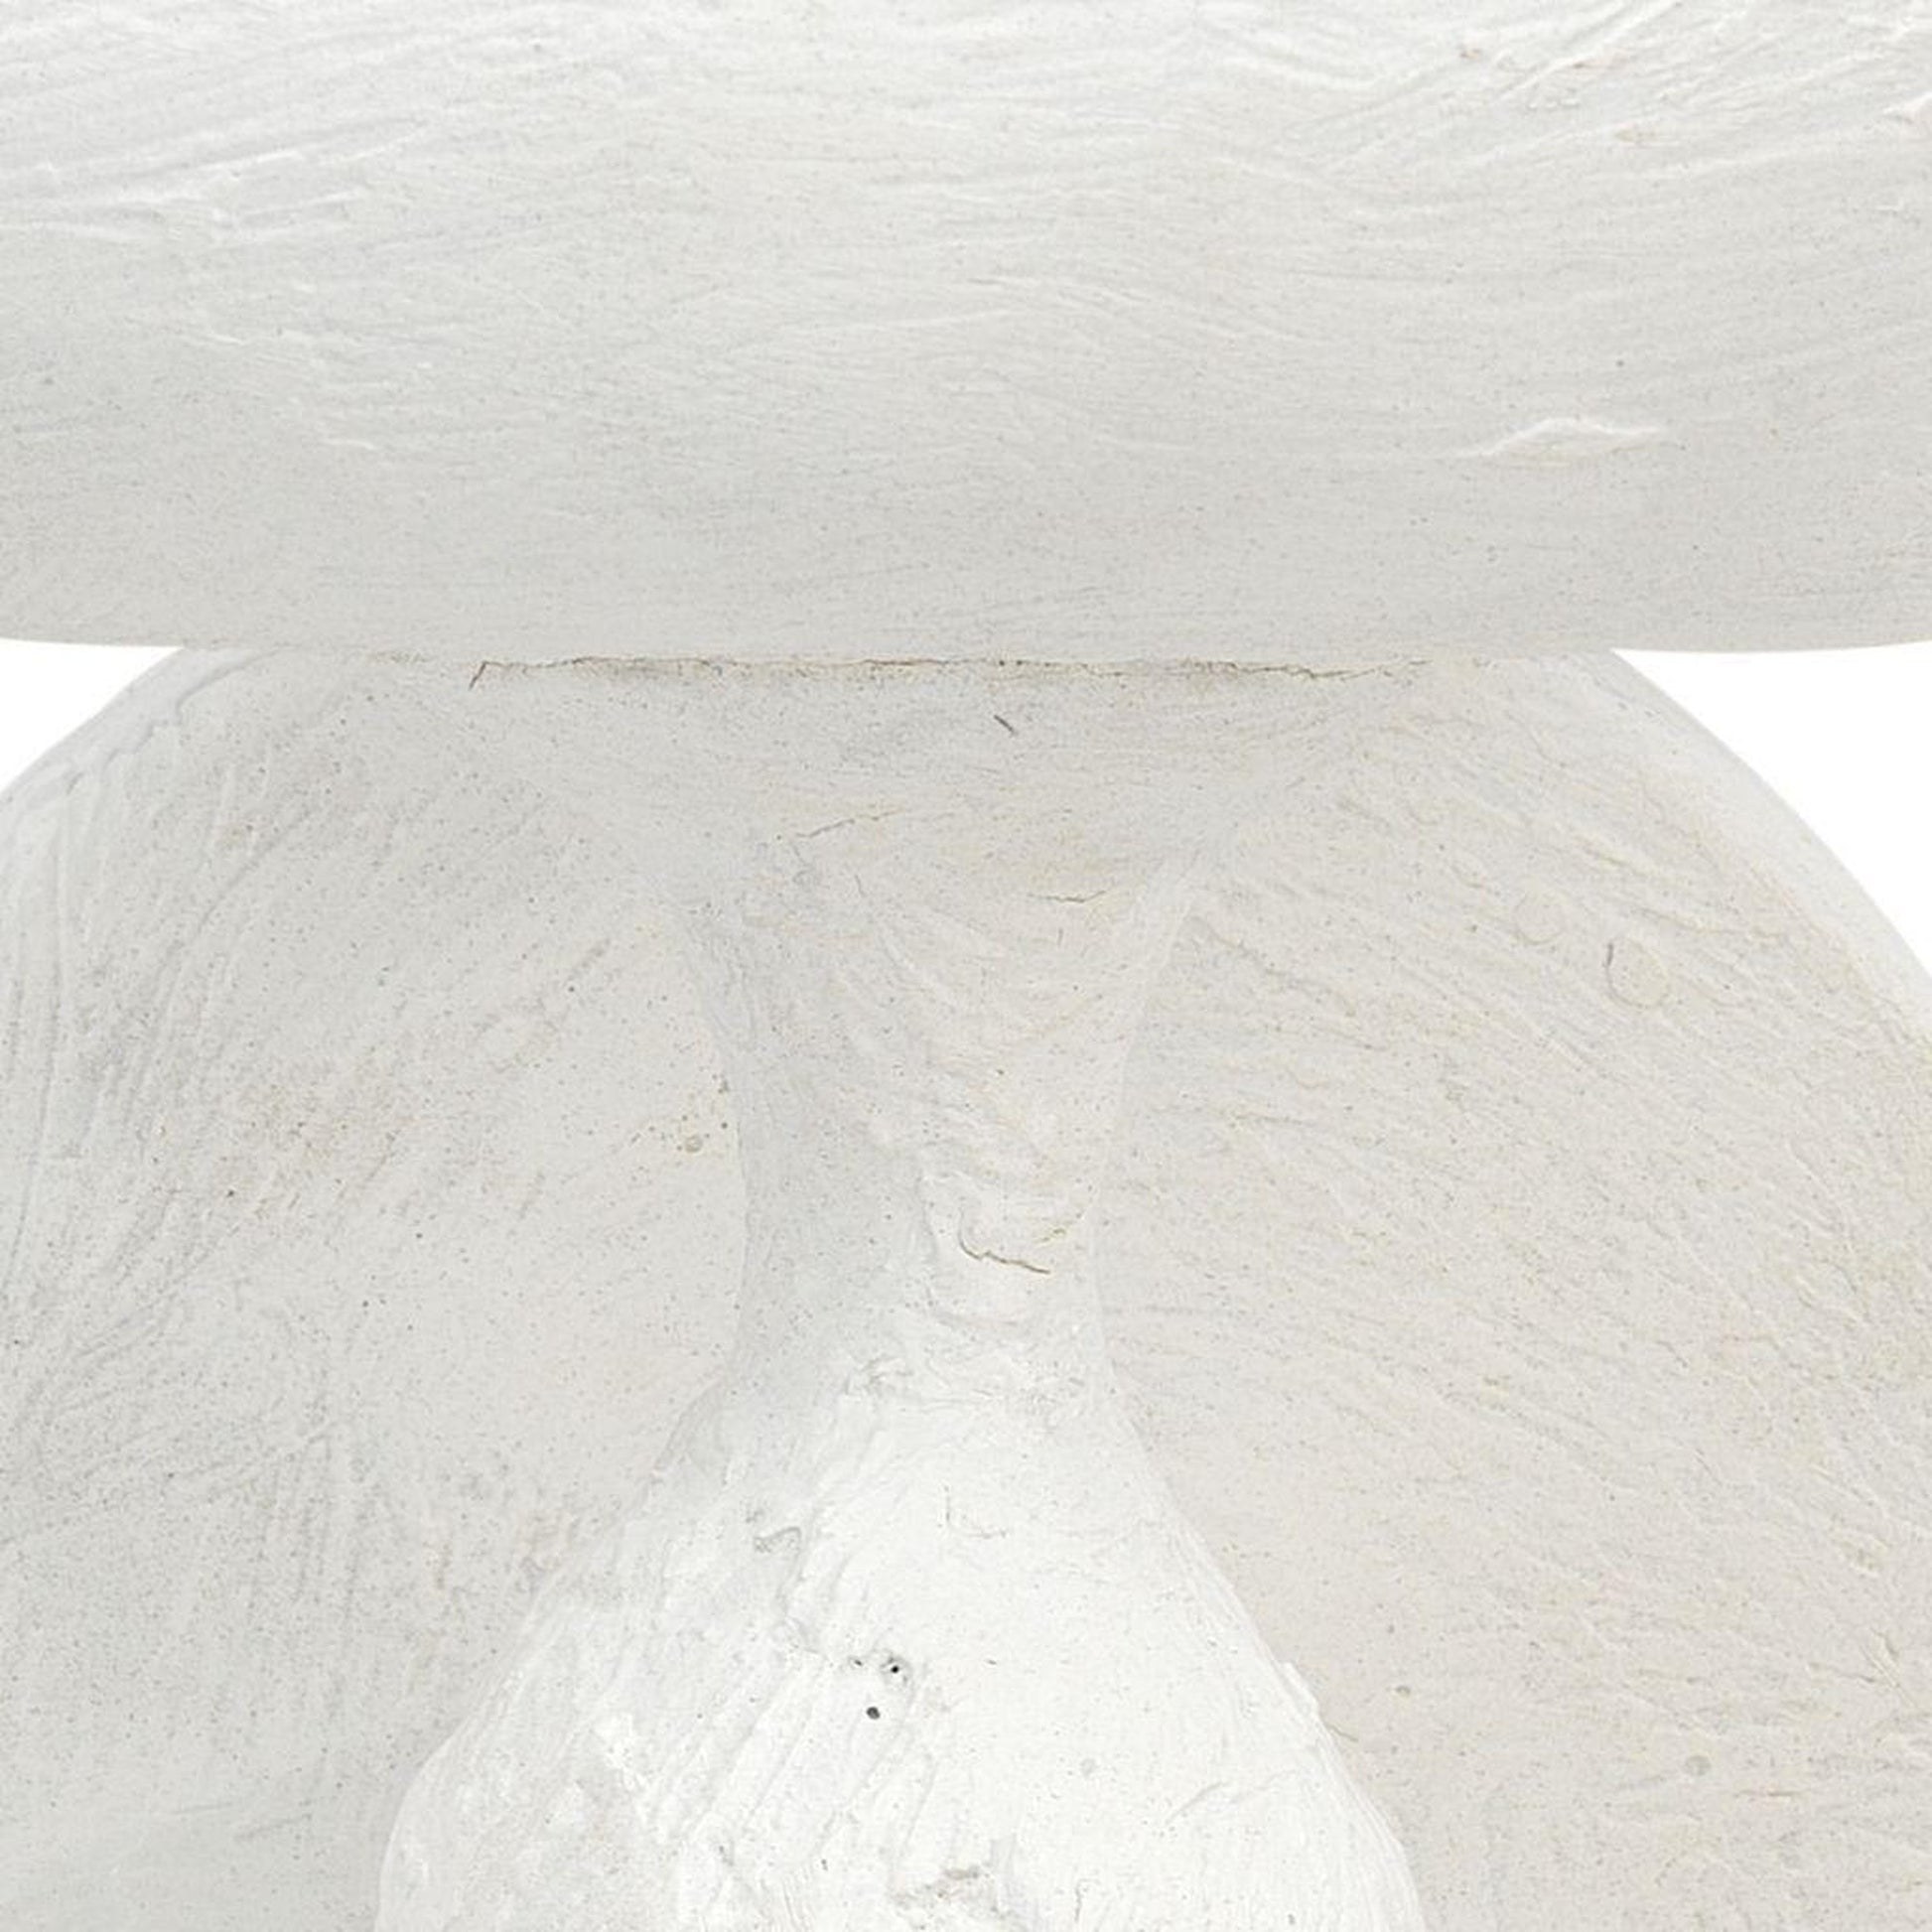 Jamie Young Concord 6" x 16" 1-Light White Plaster Wall Sconce With White Linen Tapered Shade